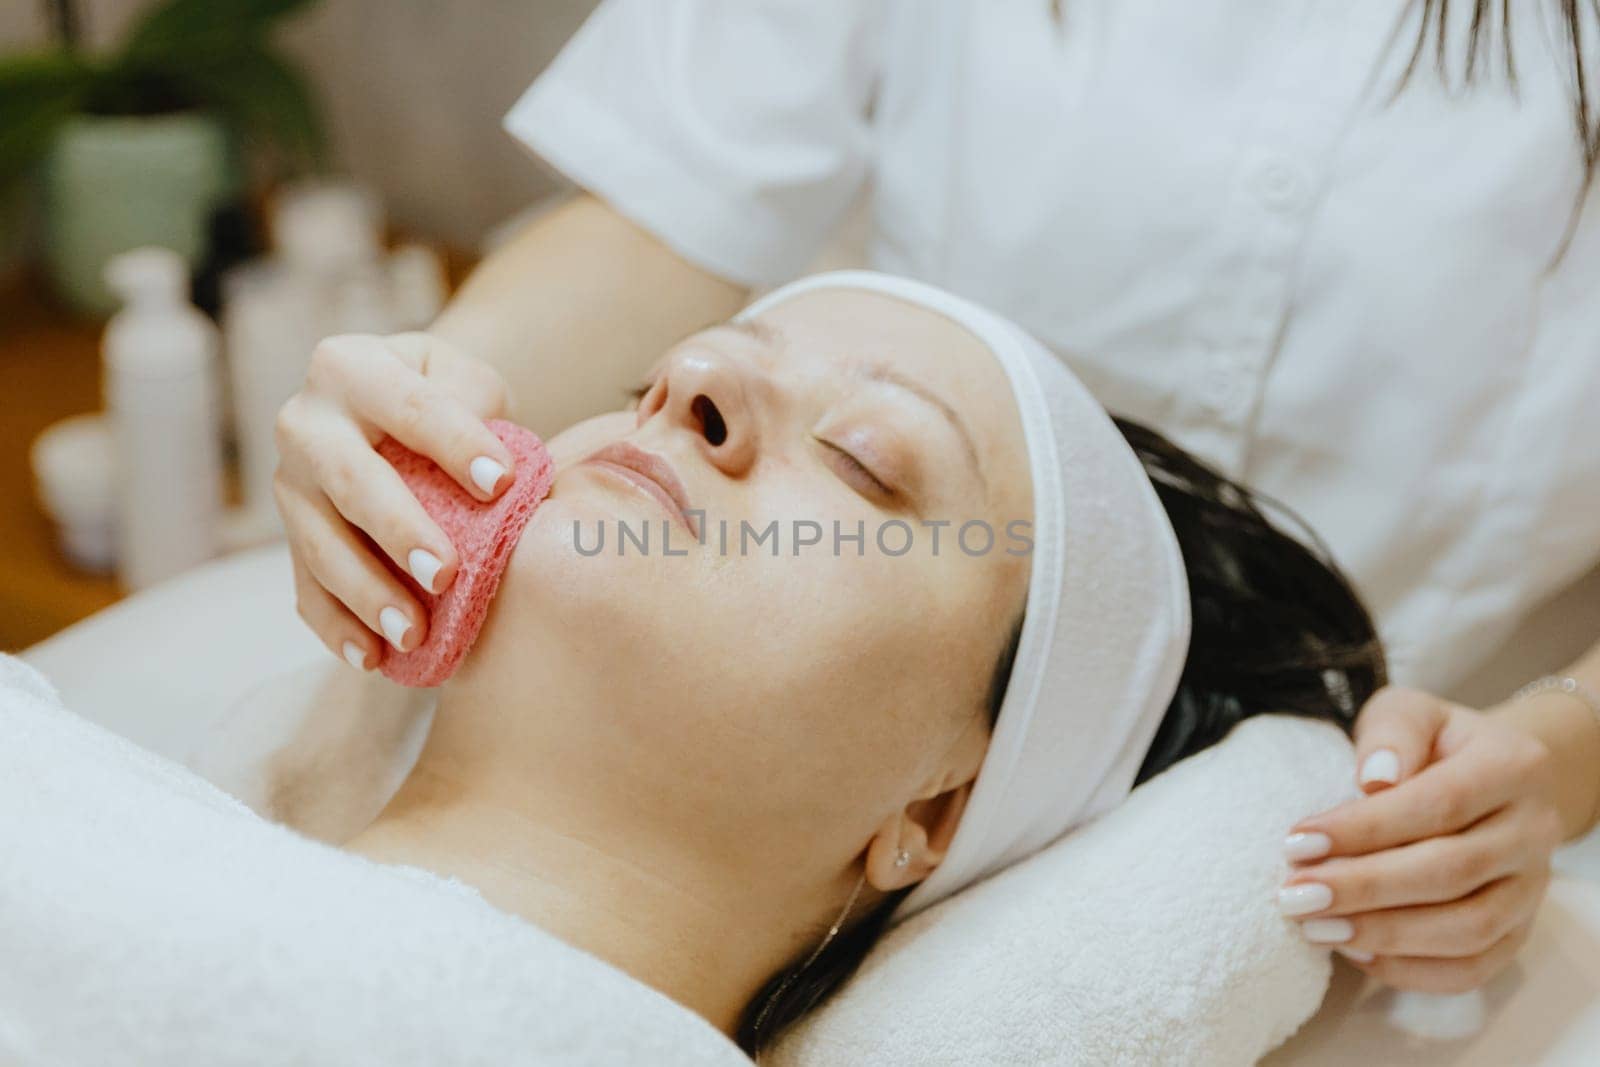 A young unrecognizable Caucasian girl cosmetologist cleans the chin of an adult female client's face using a pink scrubbing sponge, who lies with her eyes closed on a massage table in a beauty salon, side view close-up.